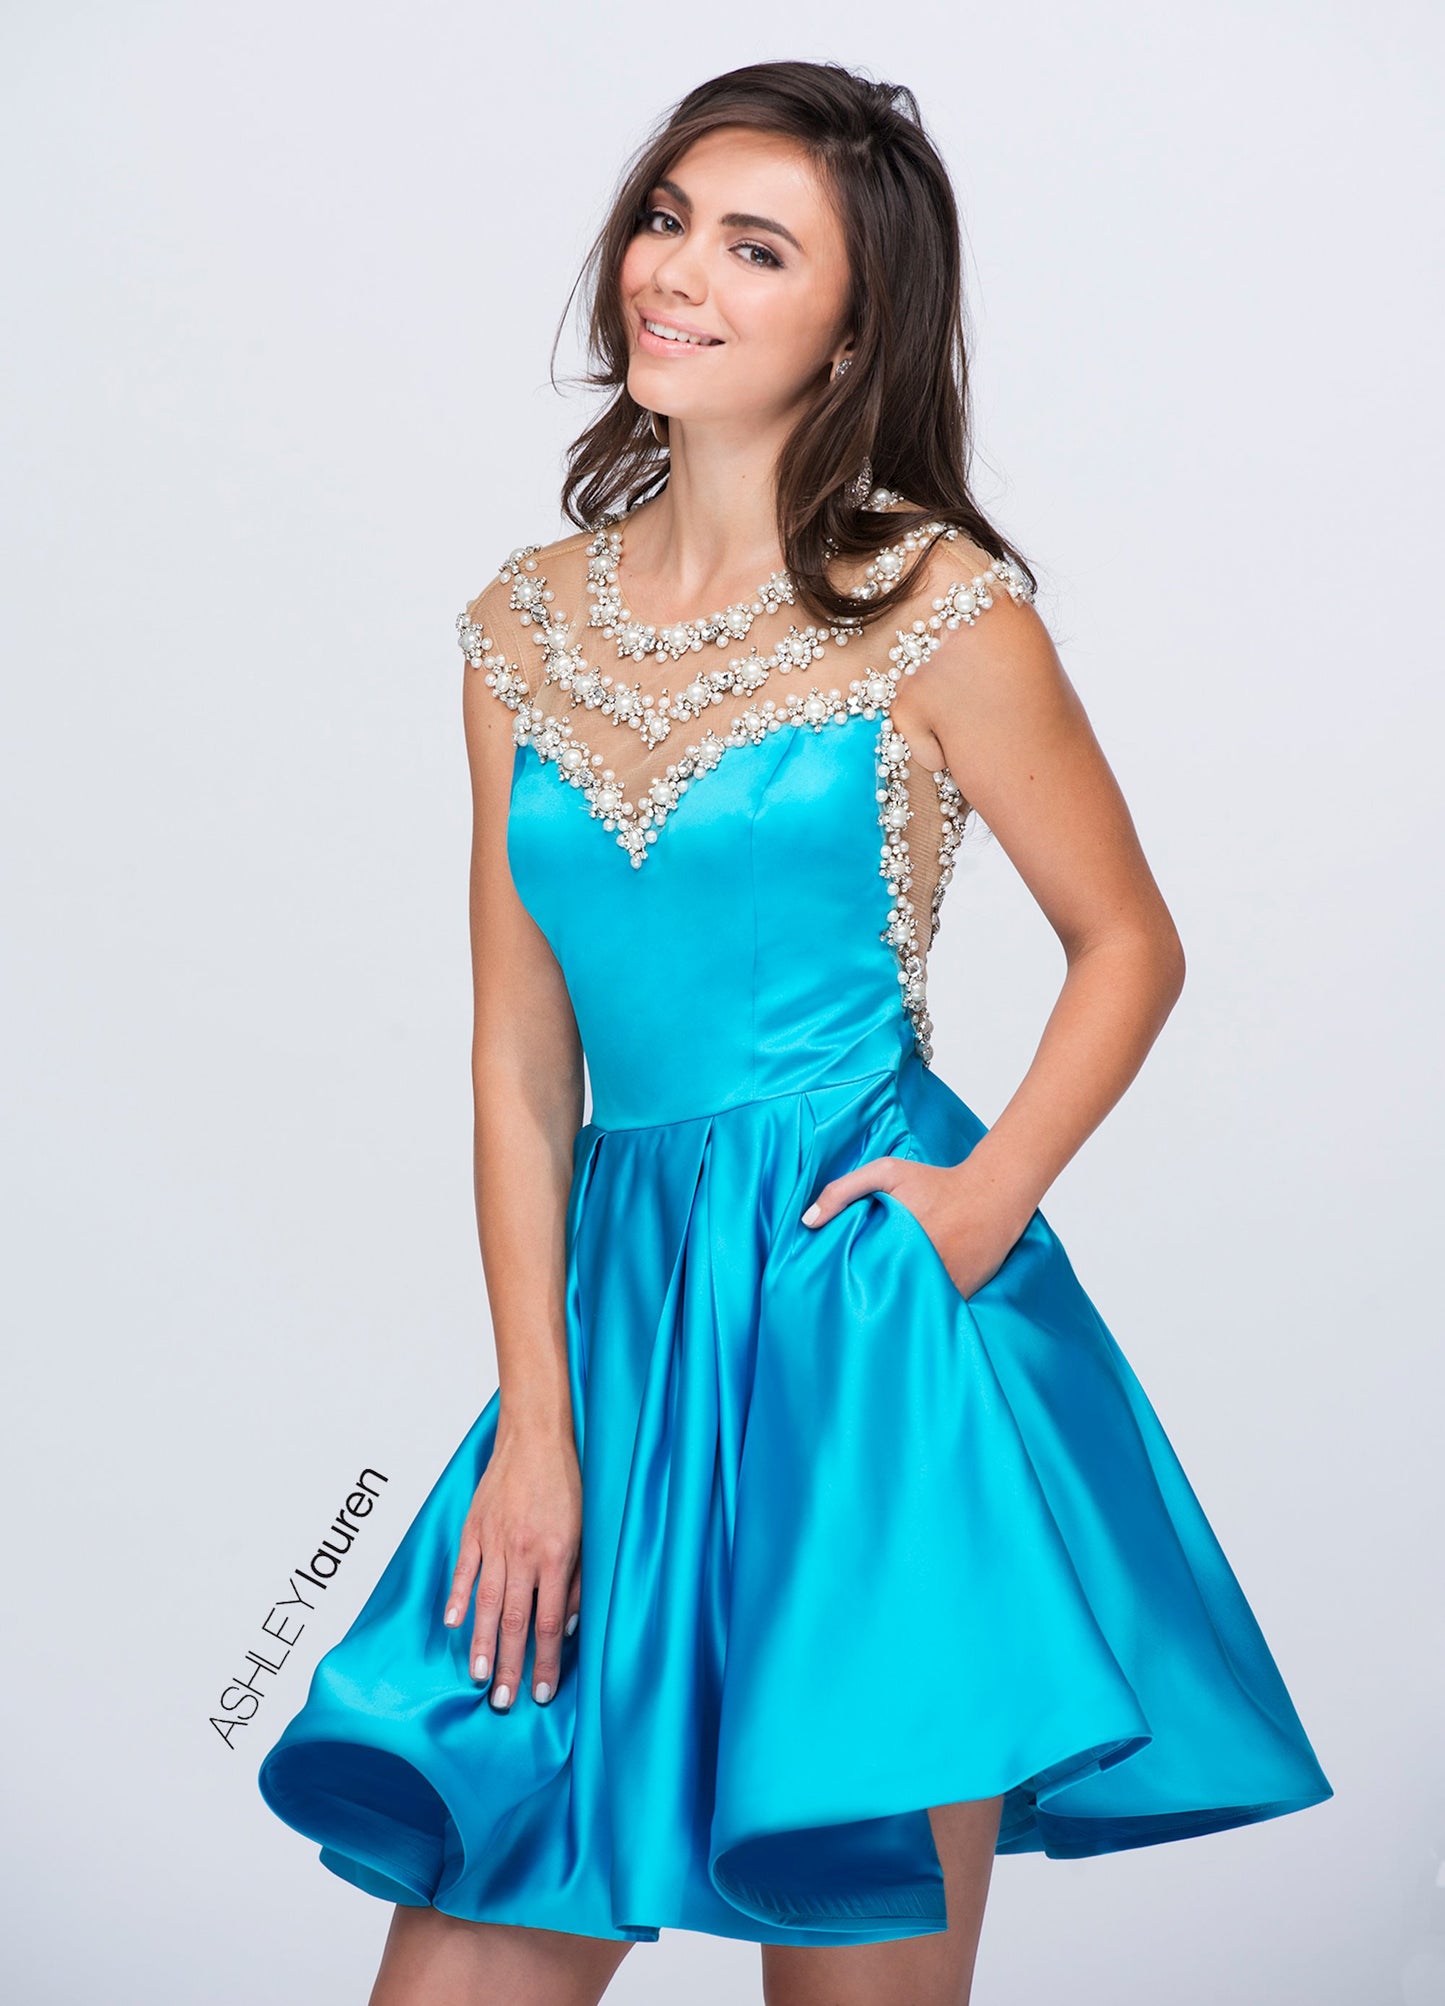 Ashley Lauren 4027 is a Gorgeous Short Fit & Flare Formal Cocktail Dress. Featuring a sheer illusion sweetheart neckline with a fitted satin bodice and sheer side cutouts. This Gown Features rows of Heavily Embellished Crystals, Pearl accents & More! Over the top Glam Style is great for Pageants, Prom & More!  Available Sizes: 4  Available Colors: Turquoise, Black, Fuchsia, Ivory Glass Slipper Formals Lake City Florida